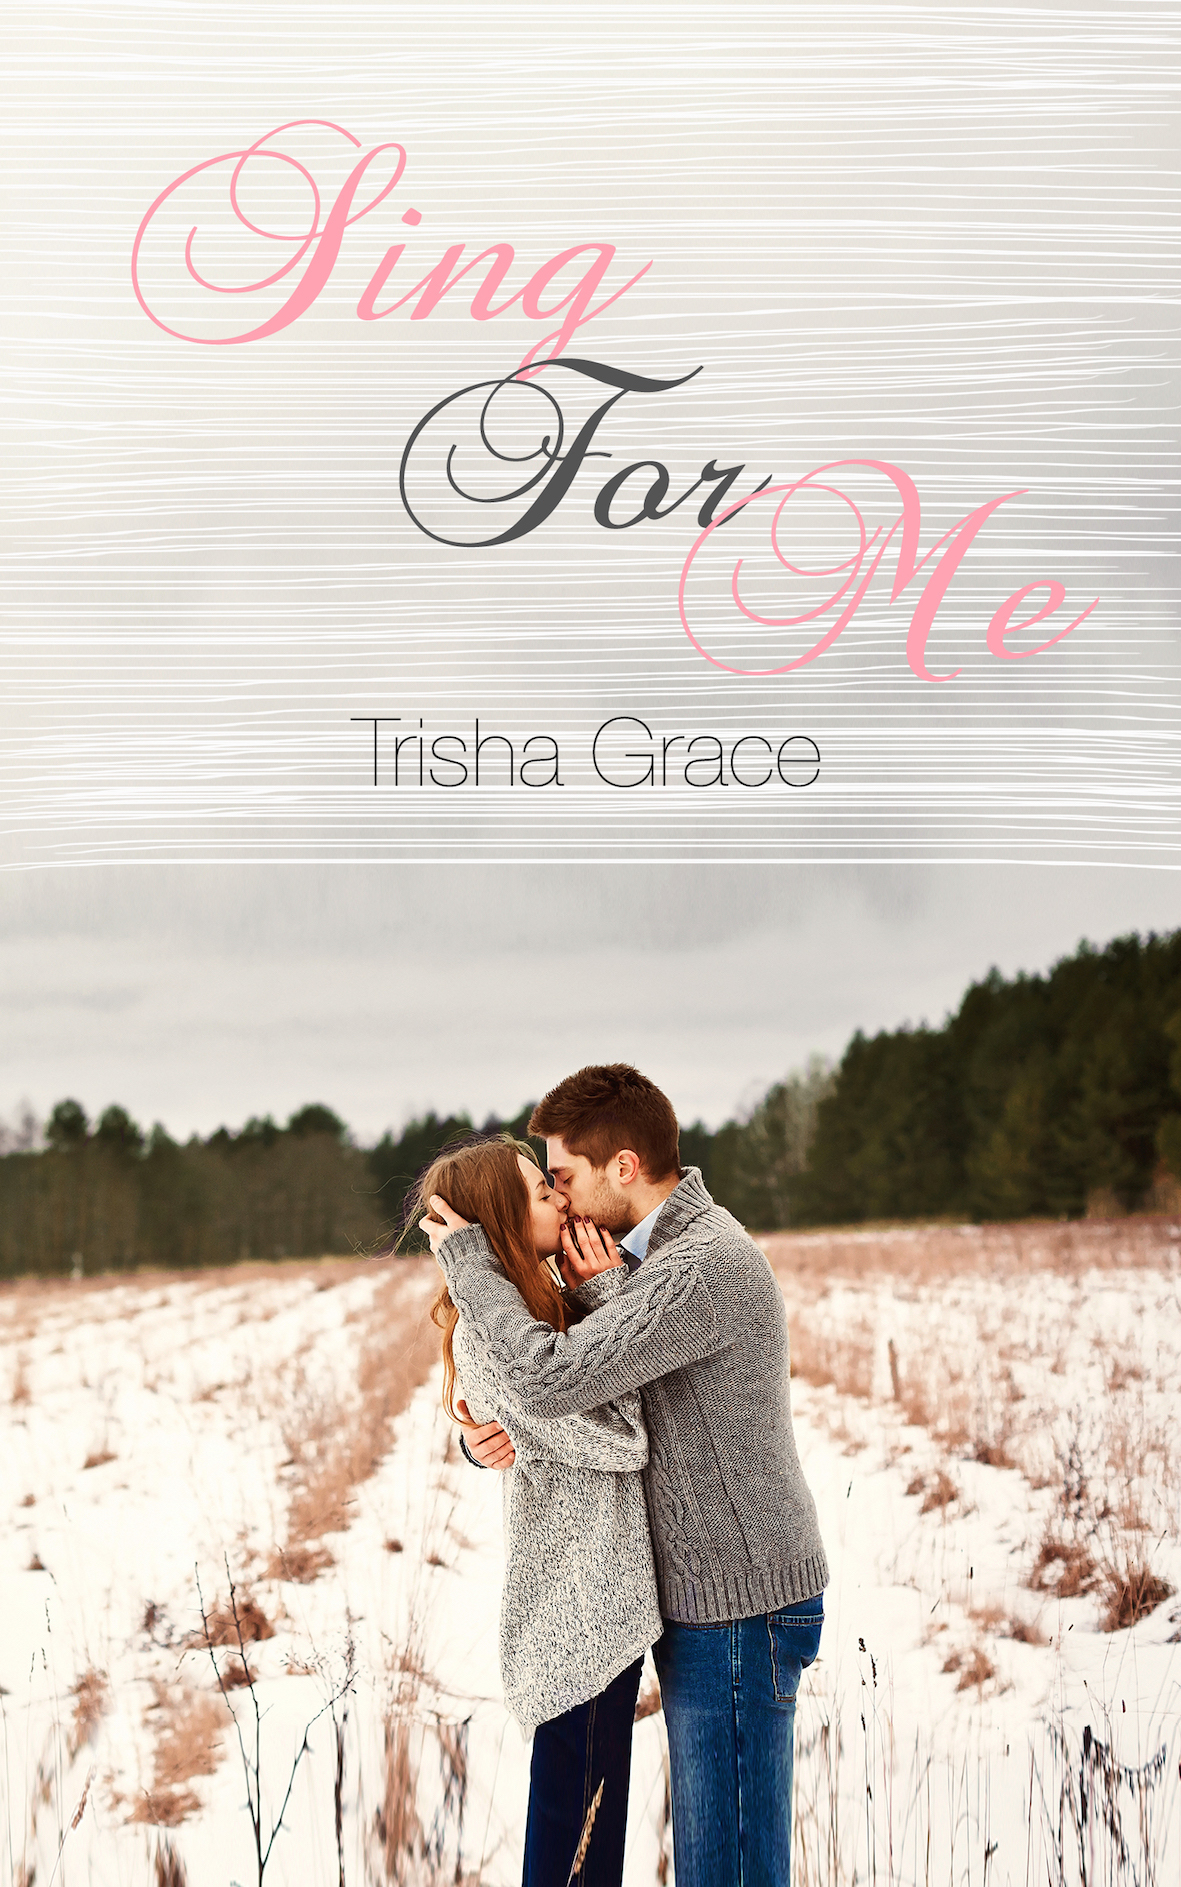 FREE: Sing For Me by Trisha Grace